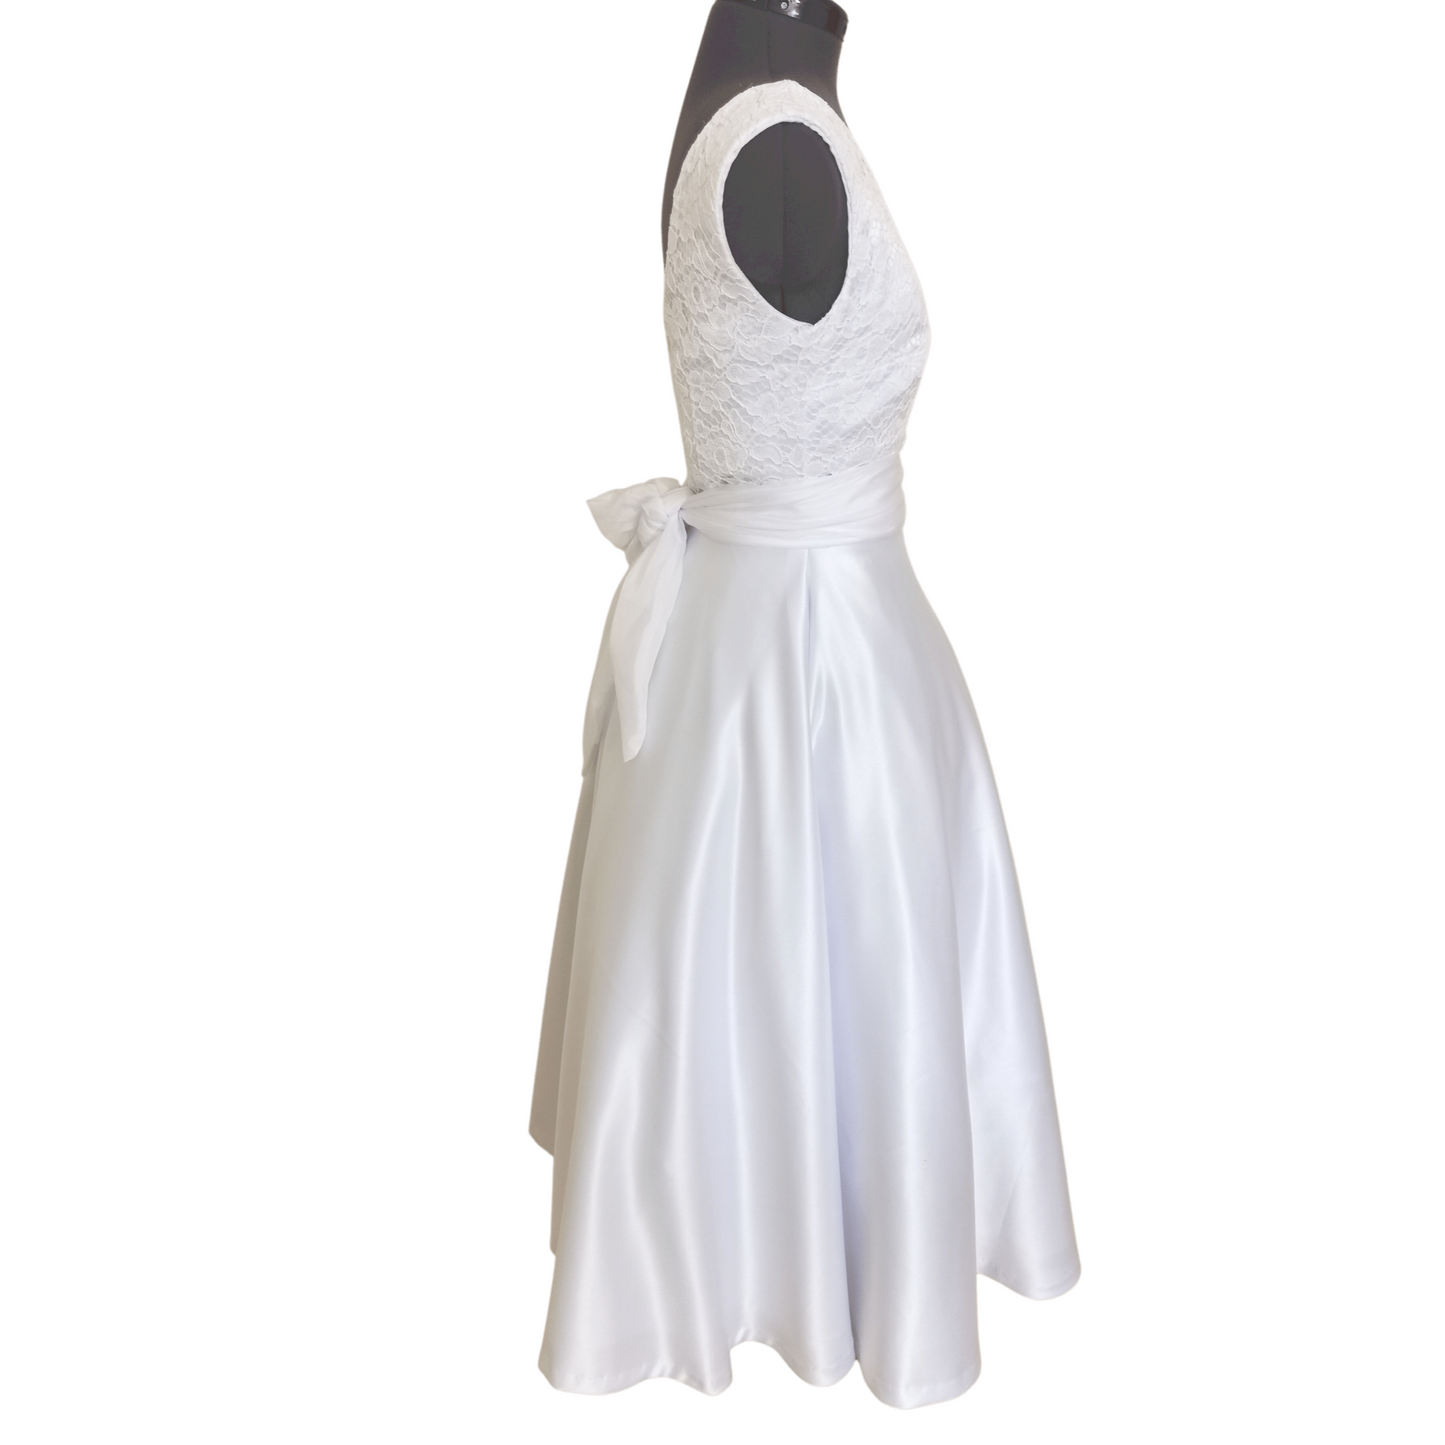 The Olivia Vintage Swing Dress is made with white cord lace on the upper bodice and duchess satin for the swing skirt; it is cut on the bias and swings freely based on the wearer's waist measurements. 